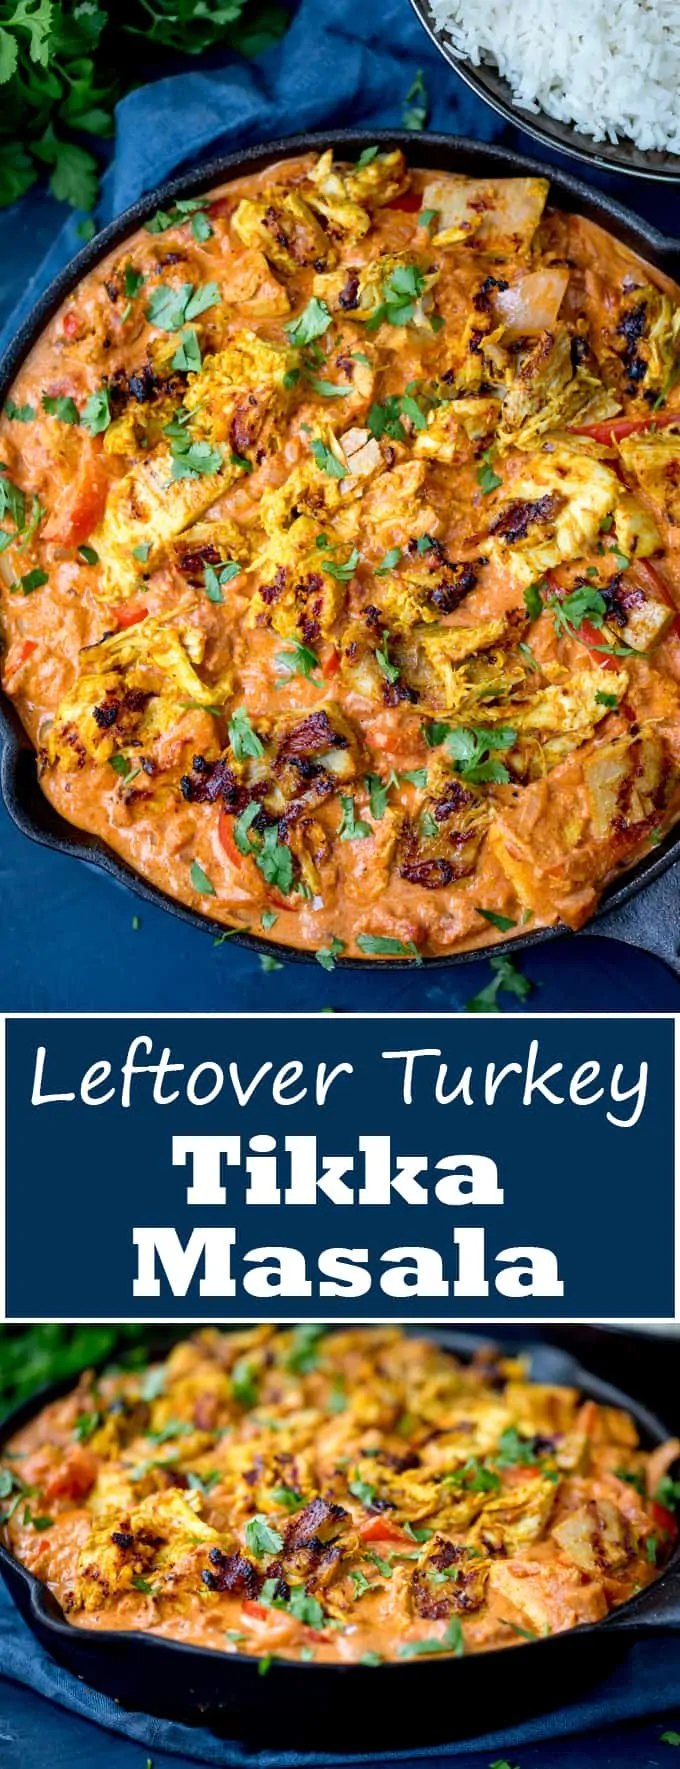 Use up that leftover turkey with this spicy-as-you-like Turkey Tikka Masala! Cream and delicious, it's on the kids and adults will enjoy. Gluten free too! #leftoverturkey #leftoverturkeyrecipe #glutenfreedinner #glutenfreecurry #boxingdaycurry